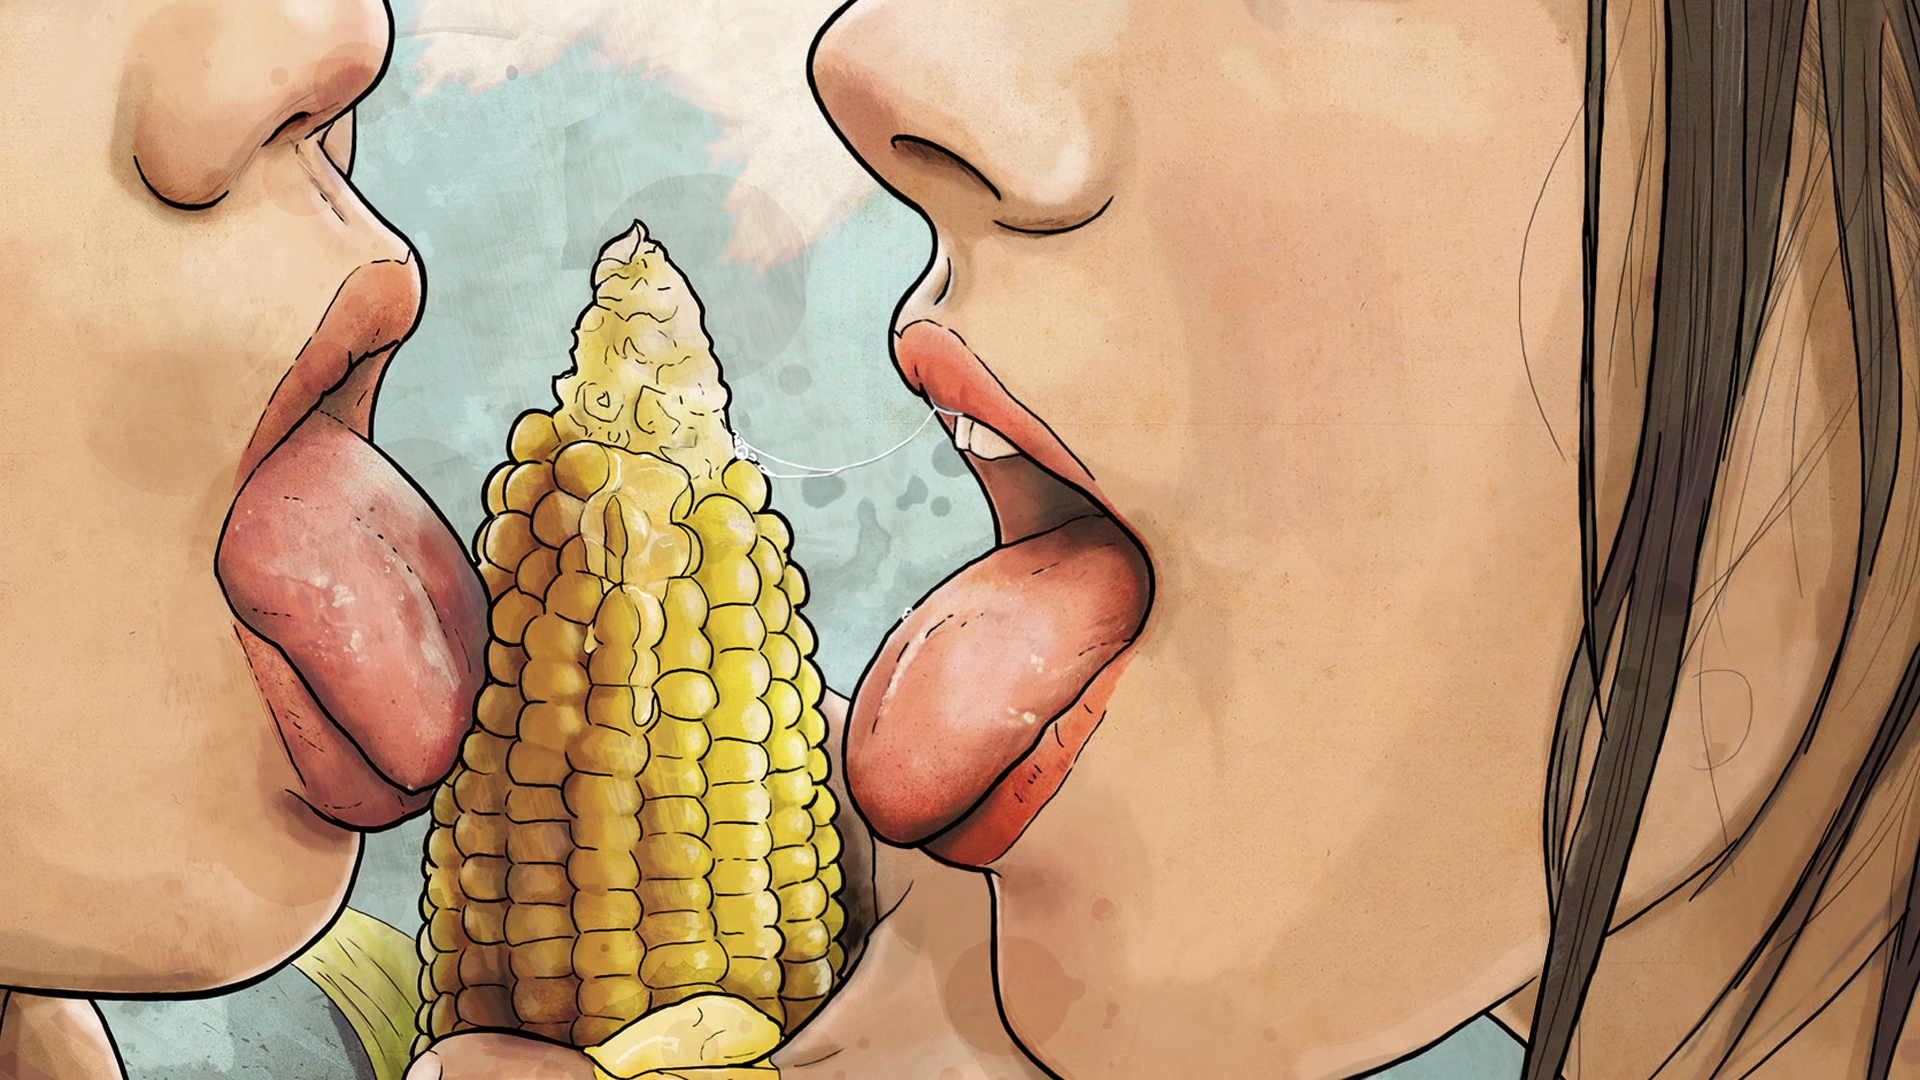 Sexy Lick a Corn Wallpapers HD / Desktop and Mobile Backgrounds.